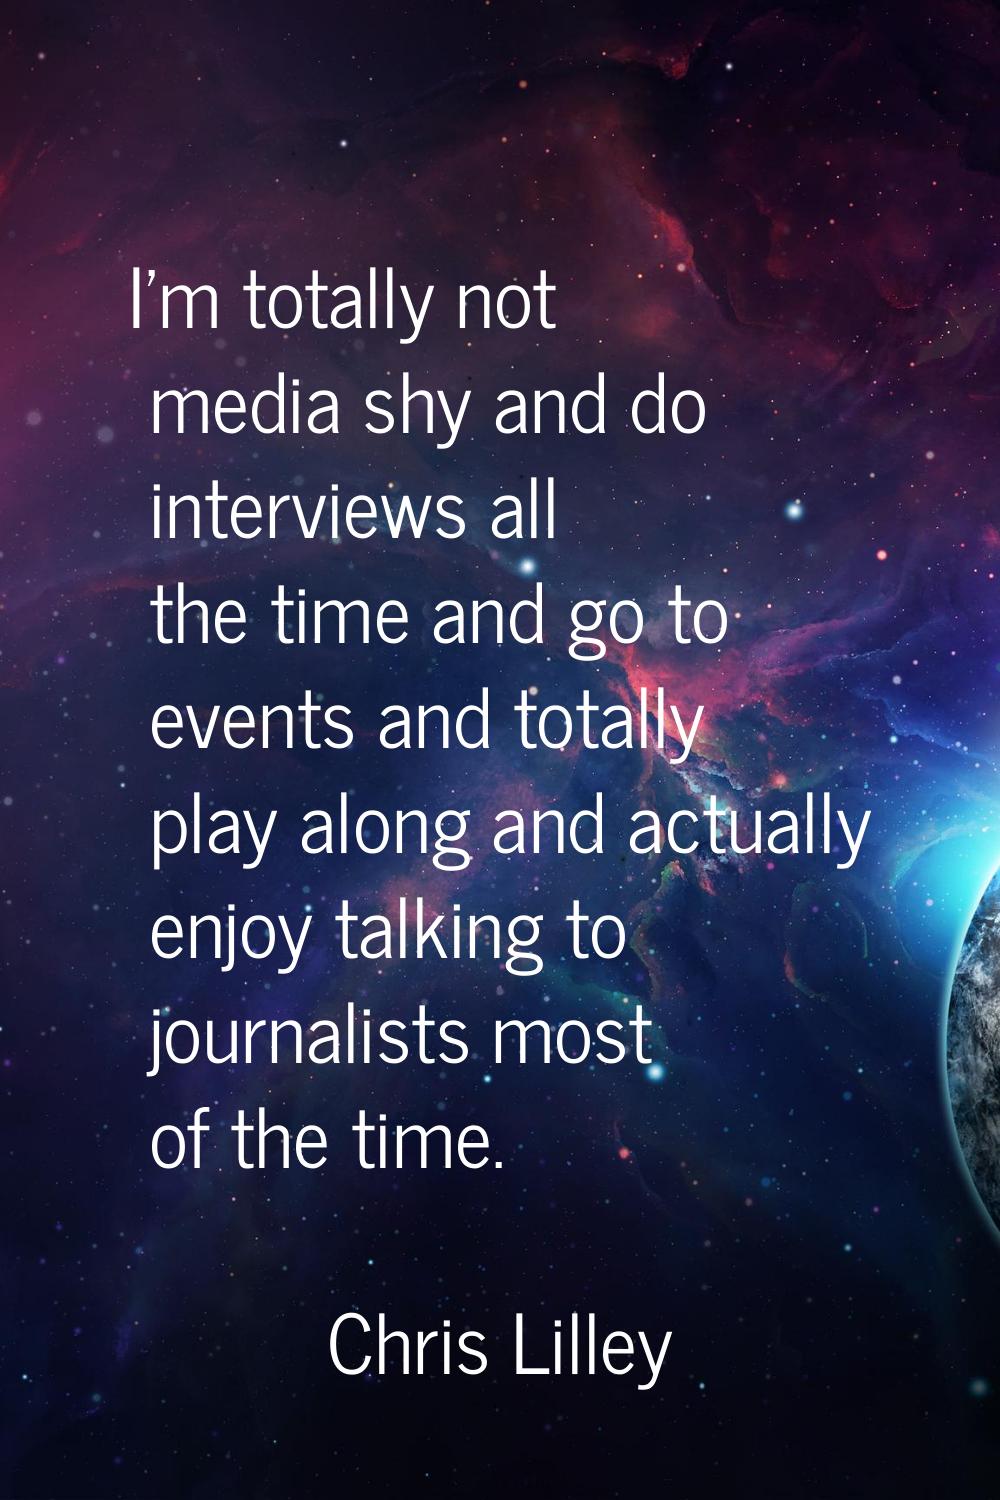 I'm totally not media shy and do interviews all the time and go to events and totally play along an